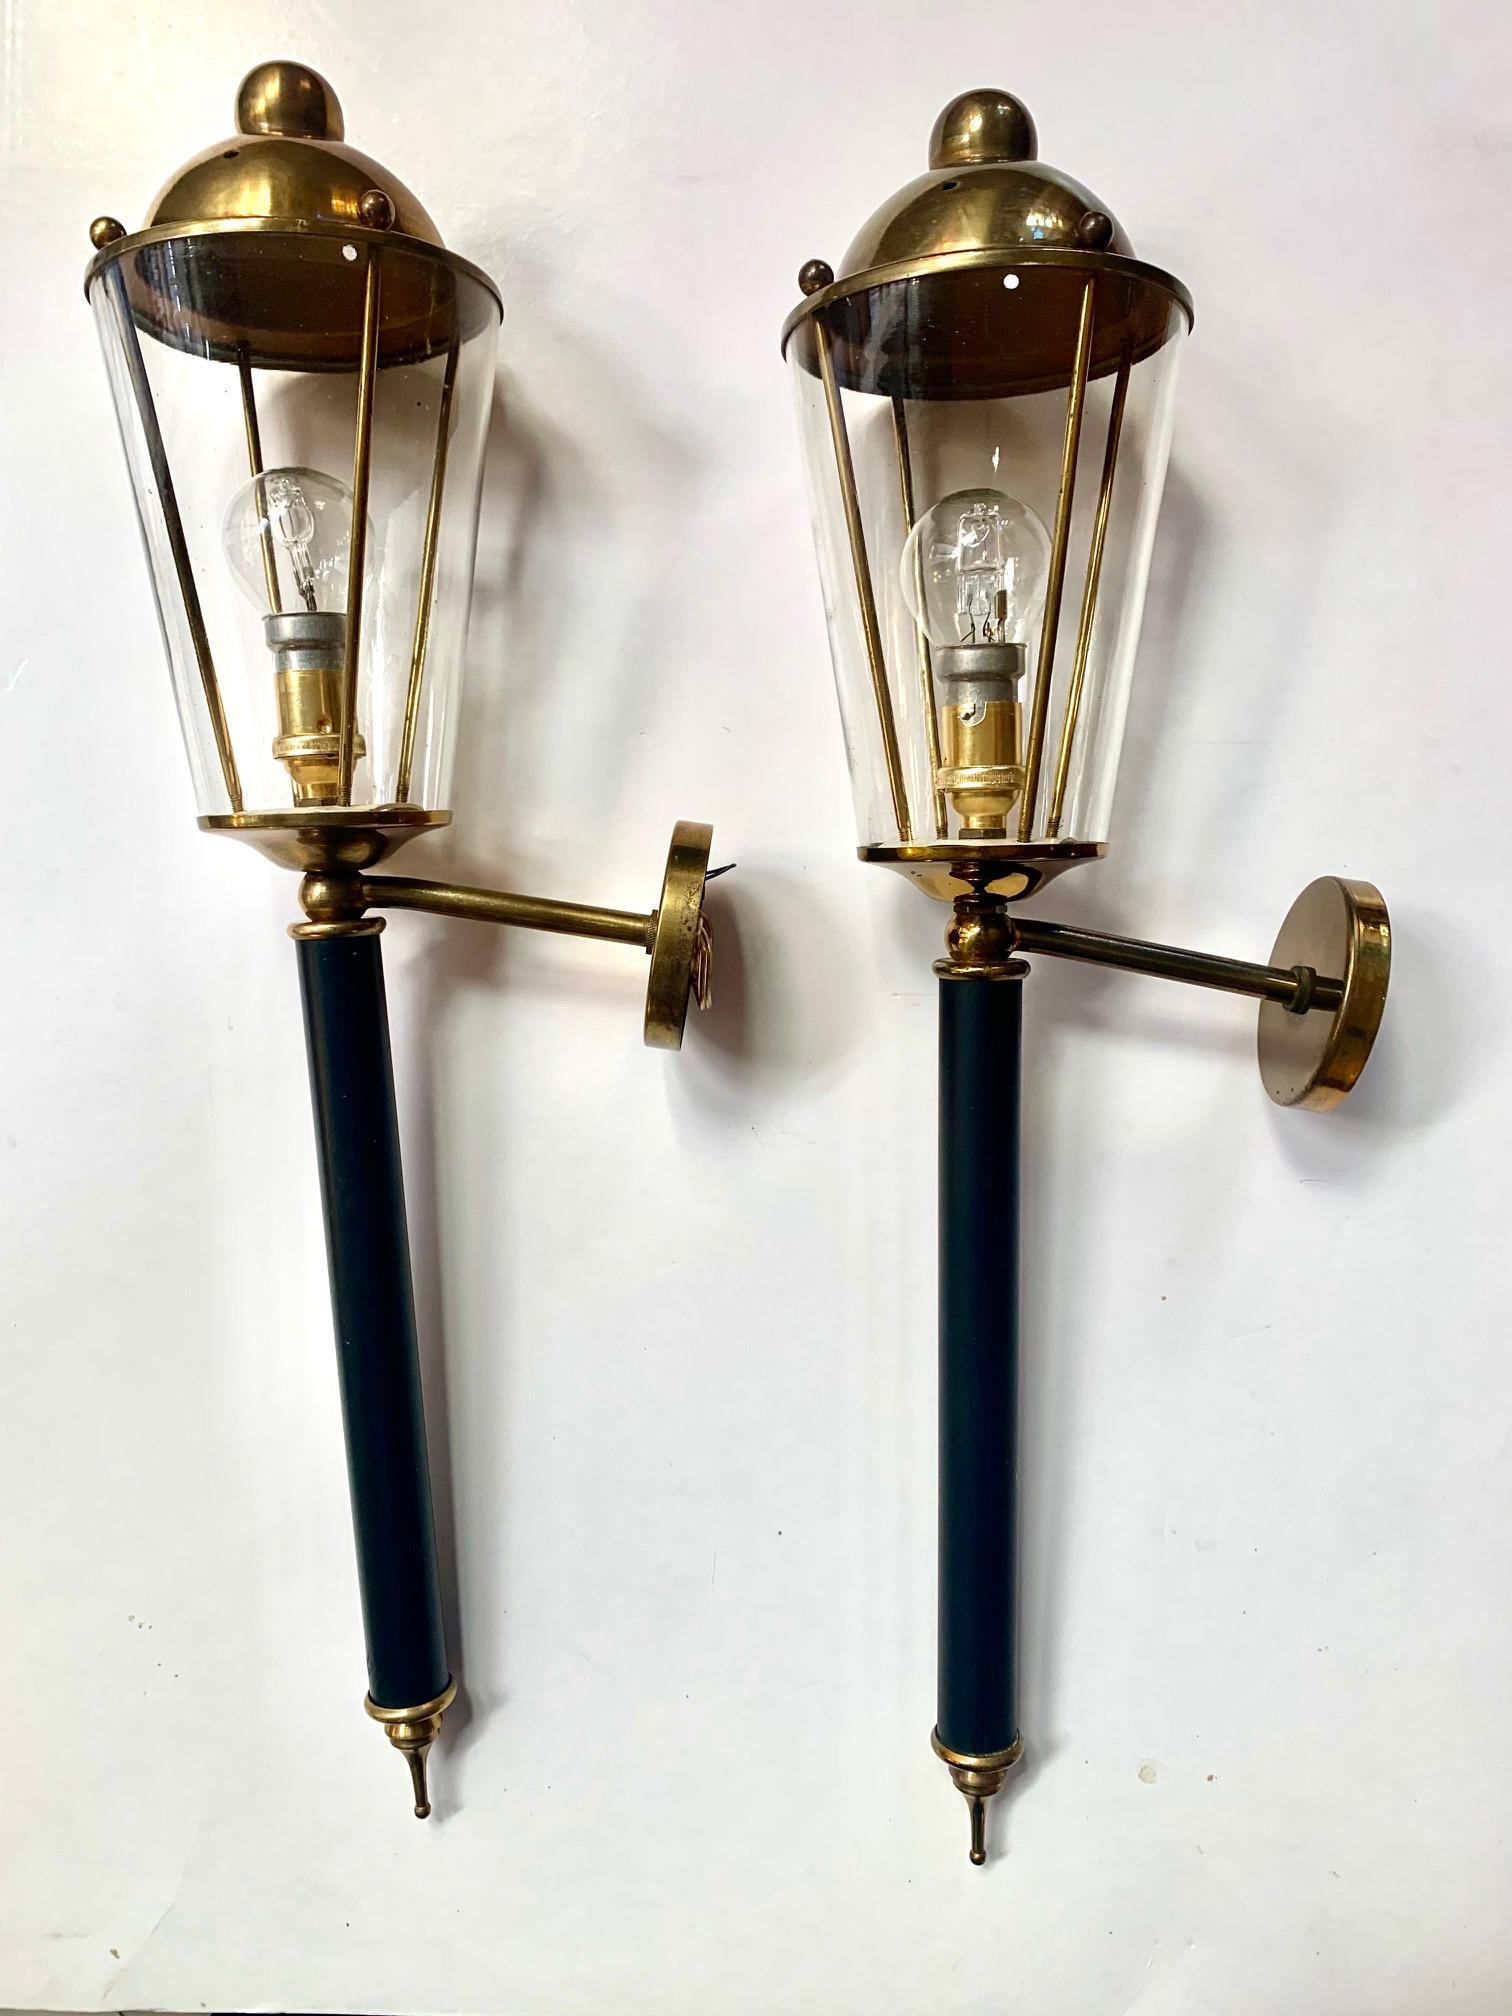 A pair of Maison Lunel wall lights, in the shape of a torchero, made of gold brass and black lacquered metal, with crystal lampshades, a completely renovated electrical system.